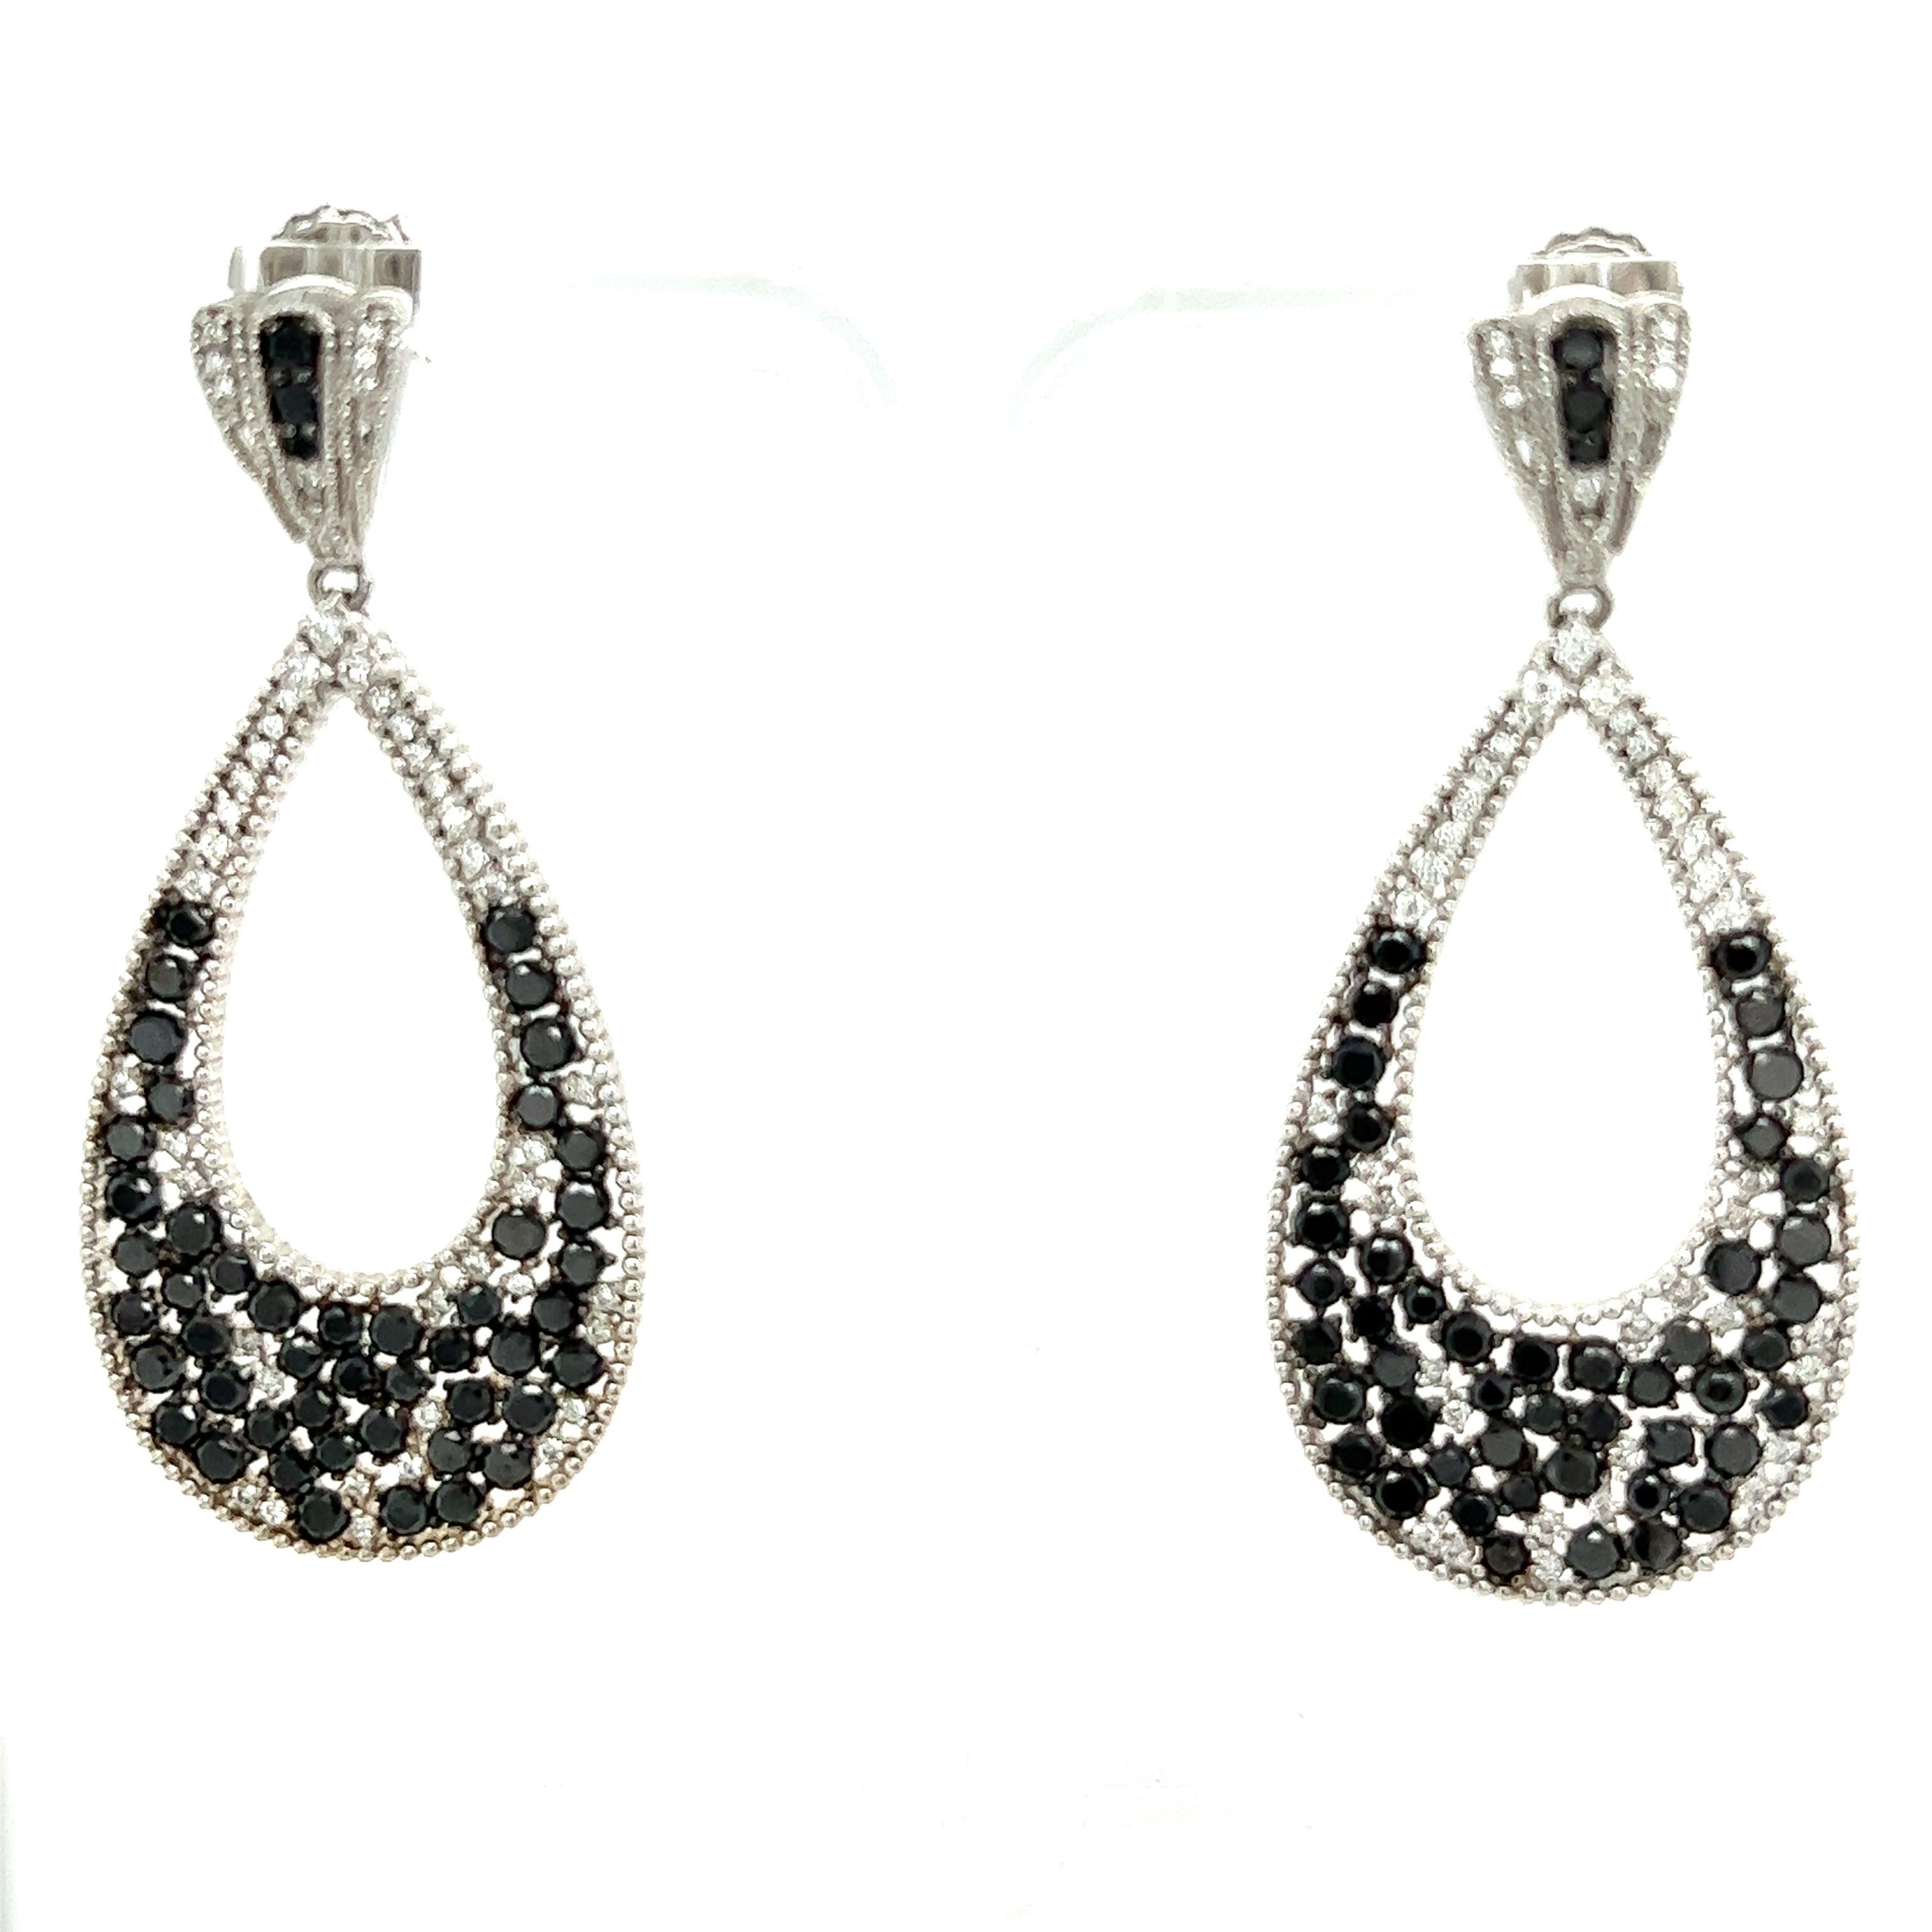 These gorgeous earrings have Natural Black Diamonds that weigh 5.39 Carats and Natural White Round Cut Diamonds that weigh 0.69 Carats. The total carat weight of the earrings is 6.09 Carats.  The clarity and color of the white diamonds are